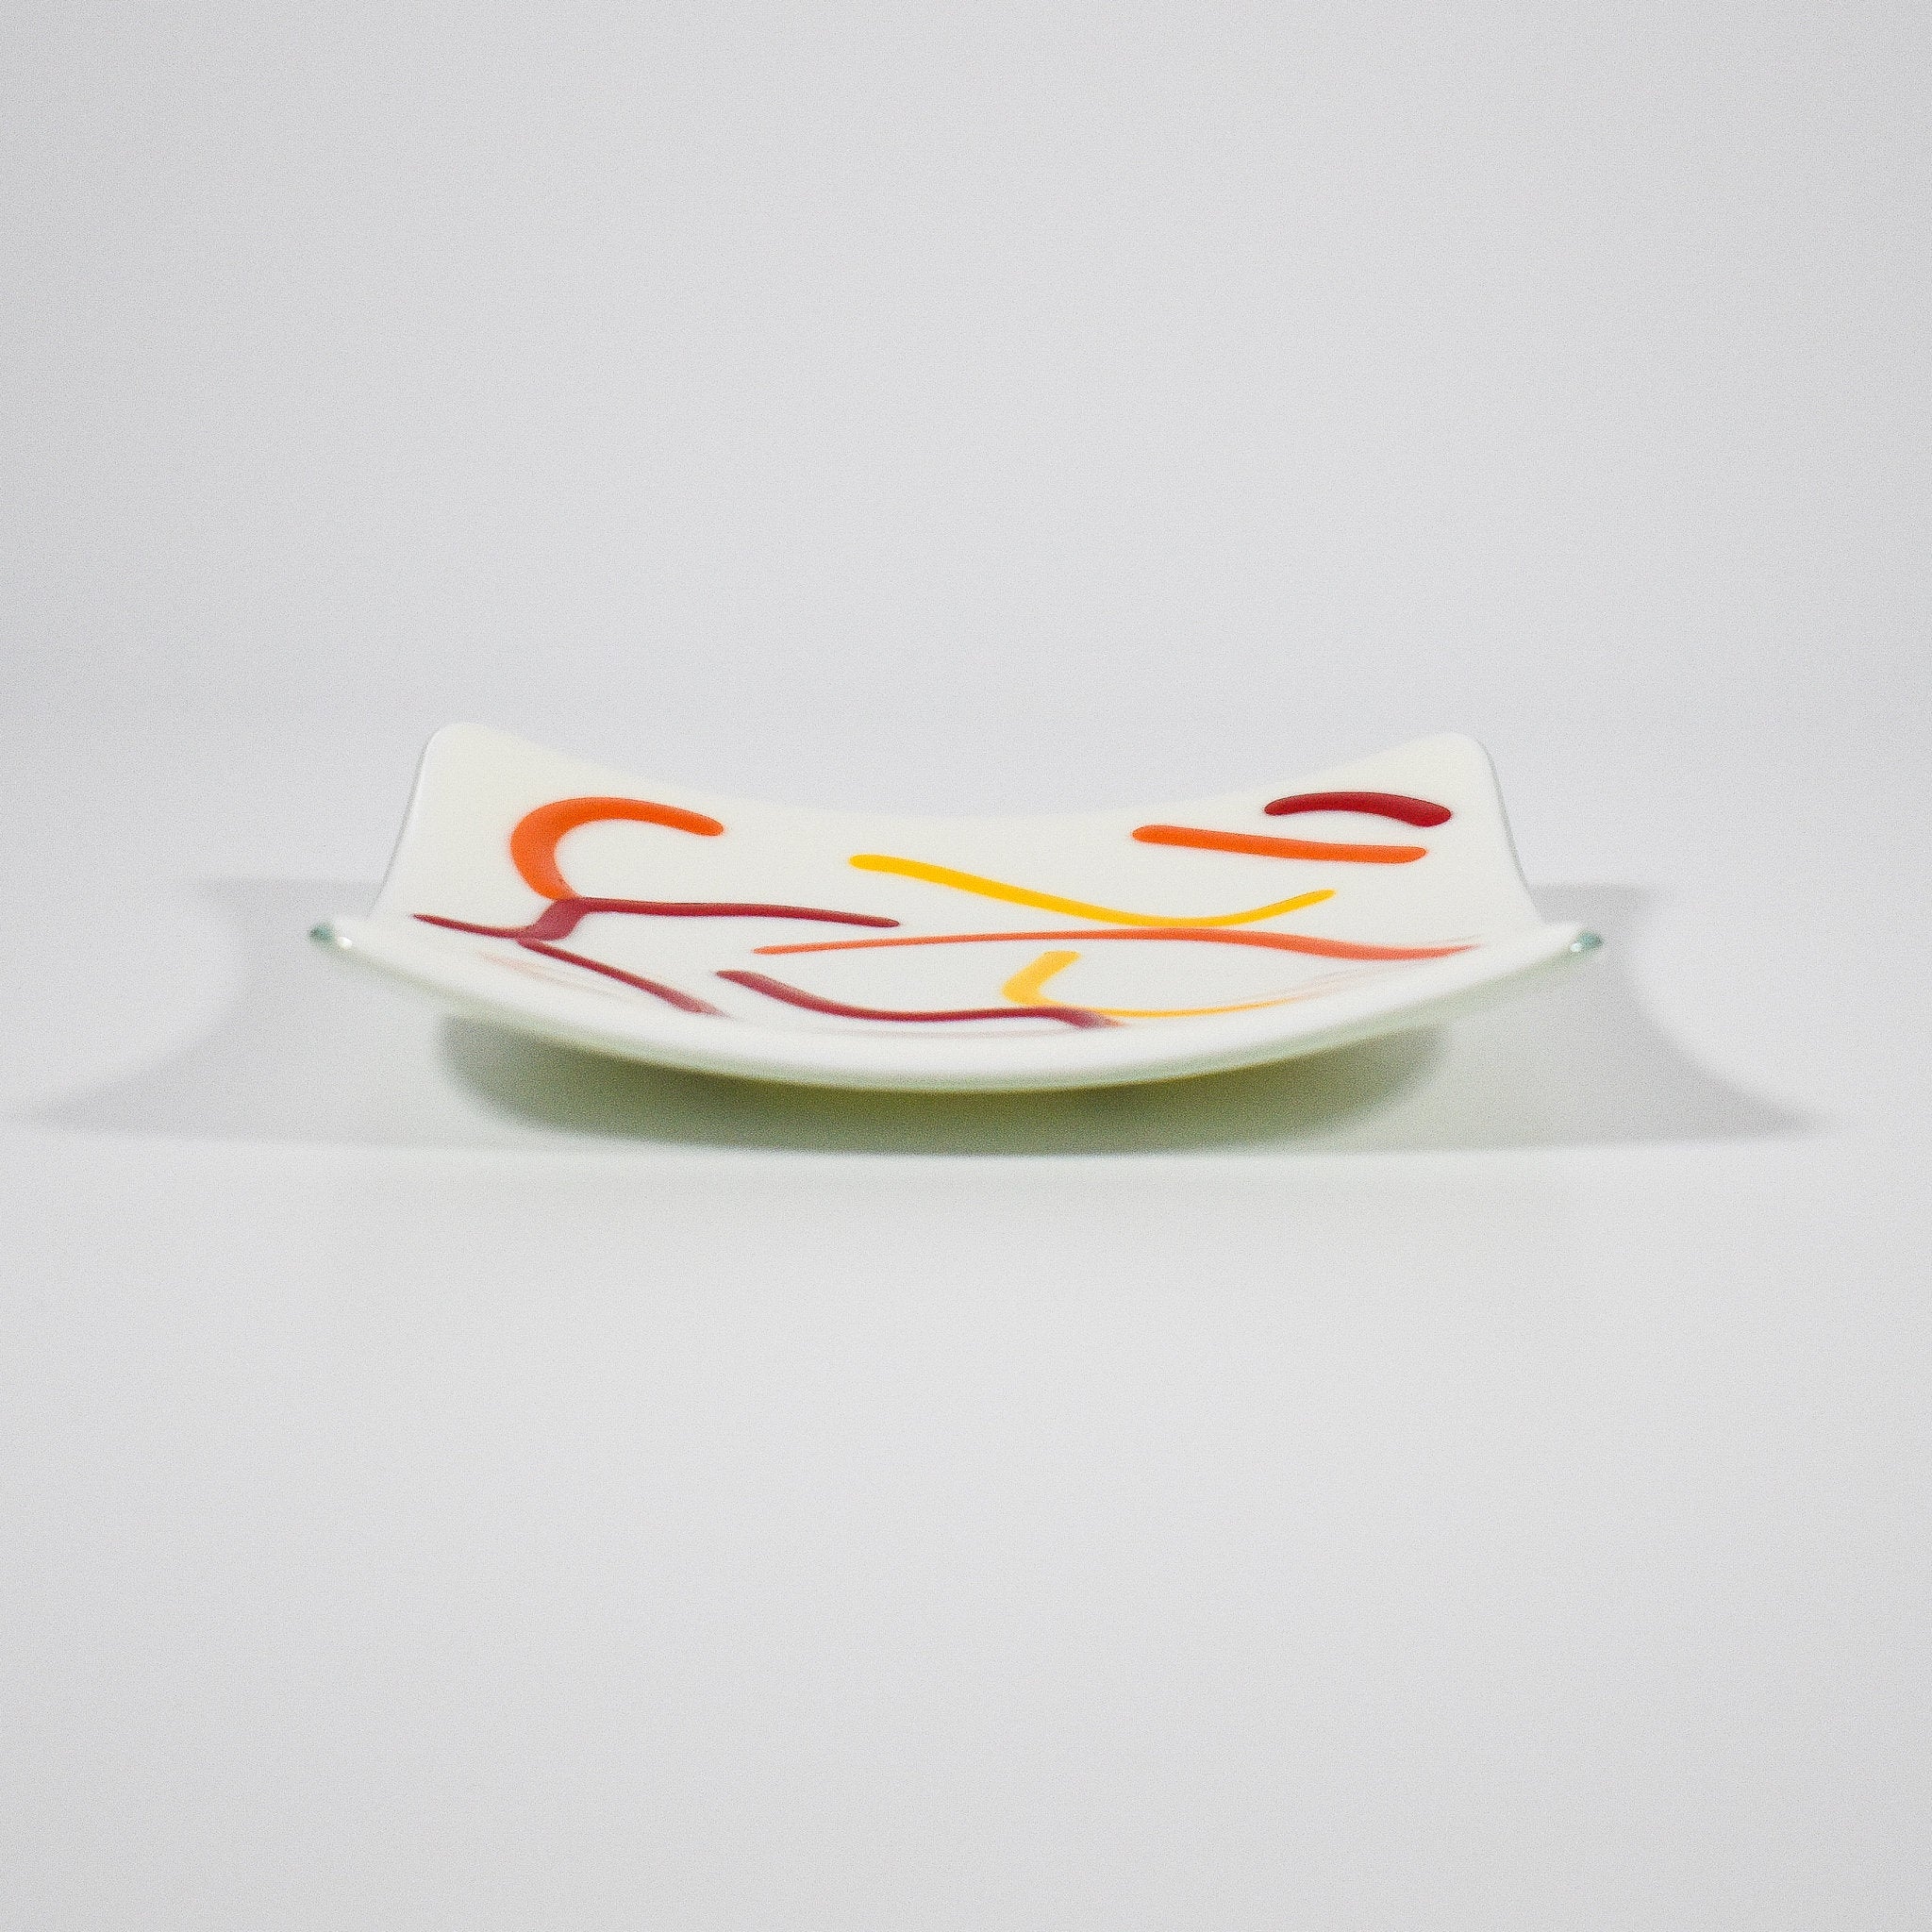 Small, square fused glass tray is cream with orange, red and yellow curve design.